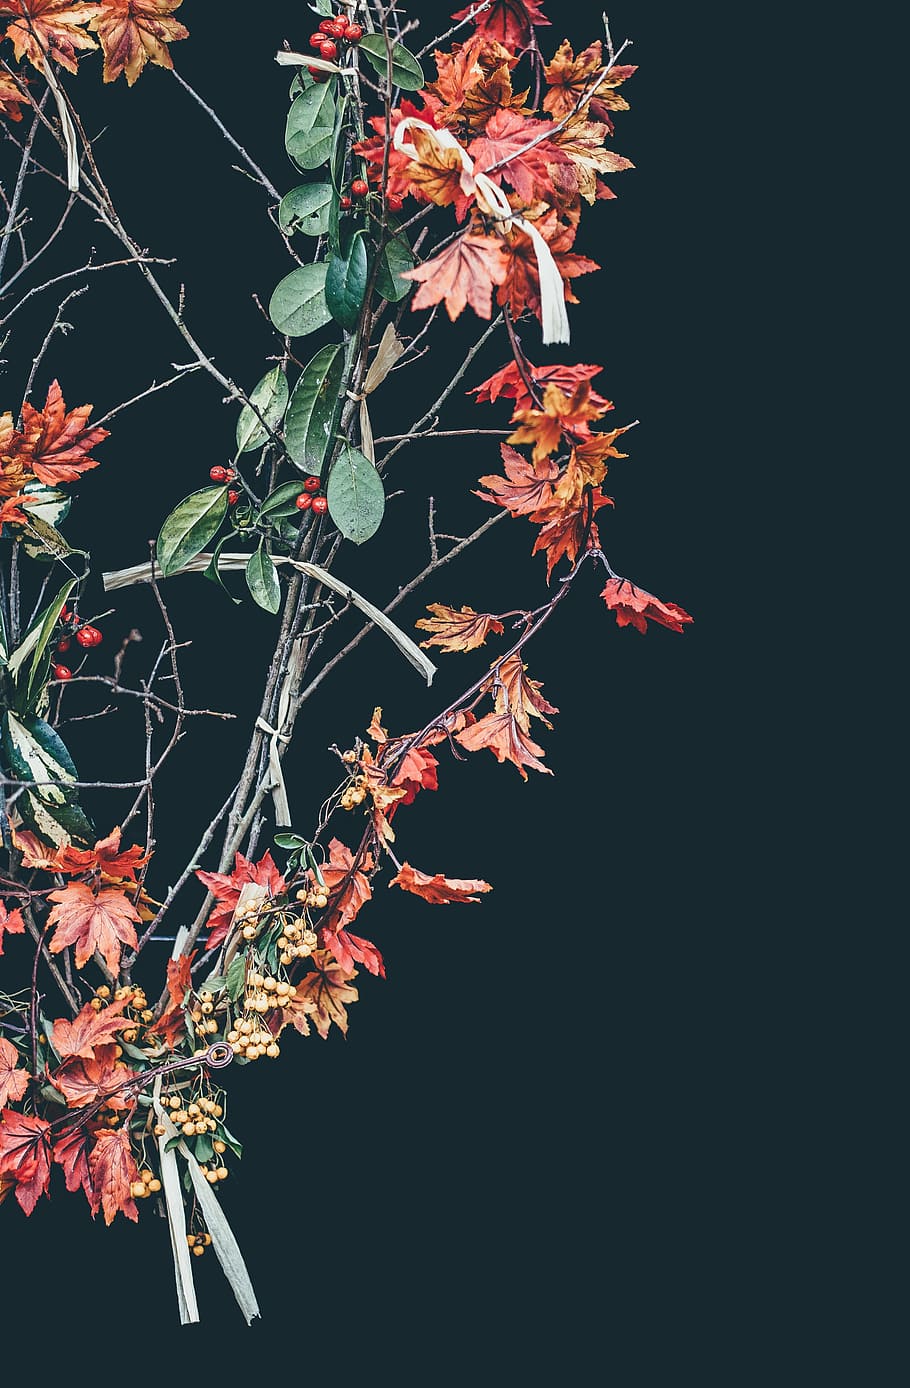 brown, red, wreath, green, flower, leaf, fall, autumn, branch, tree